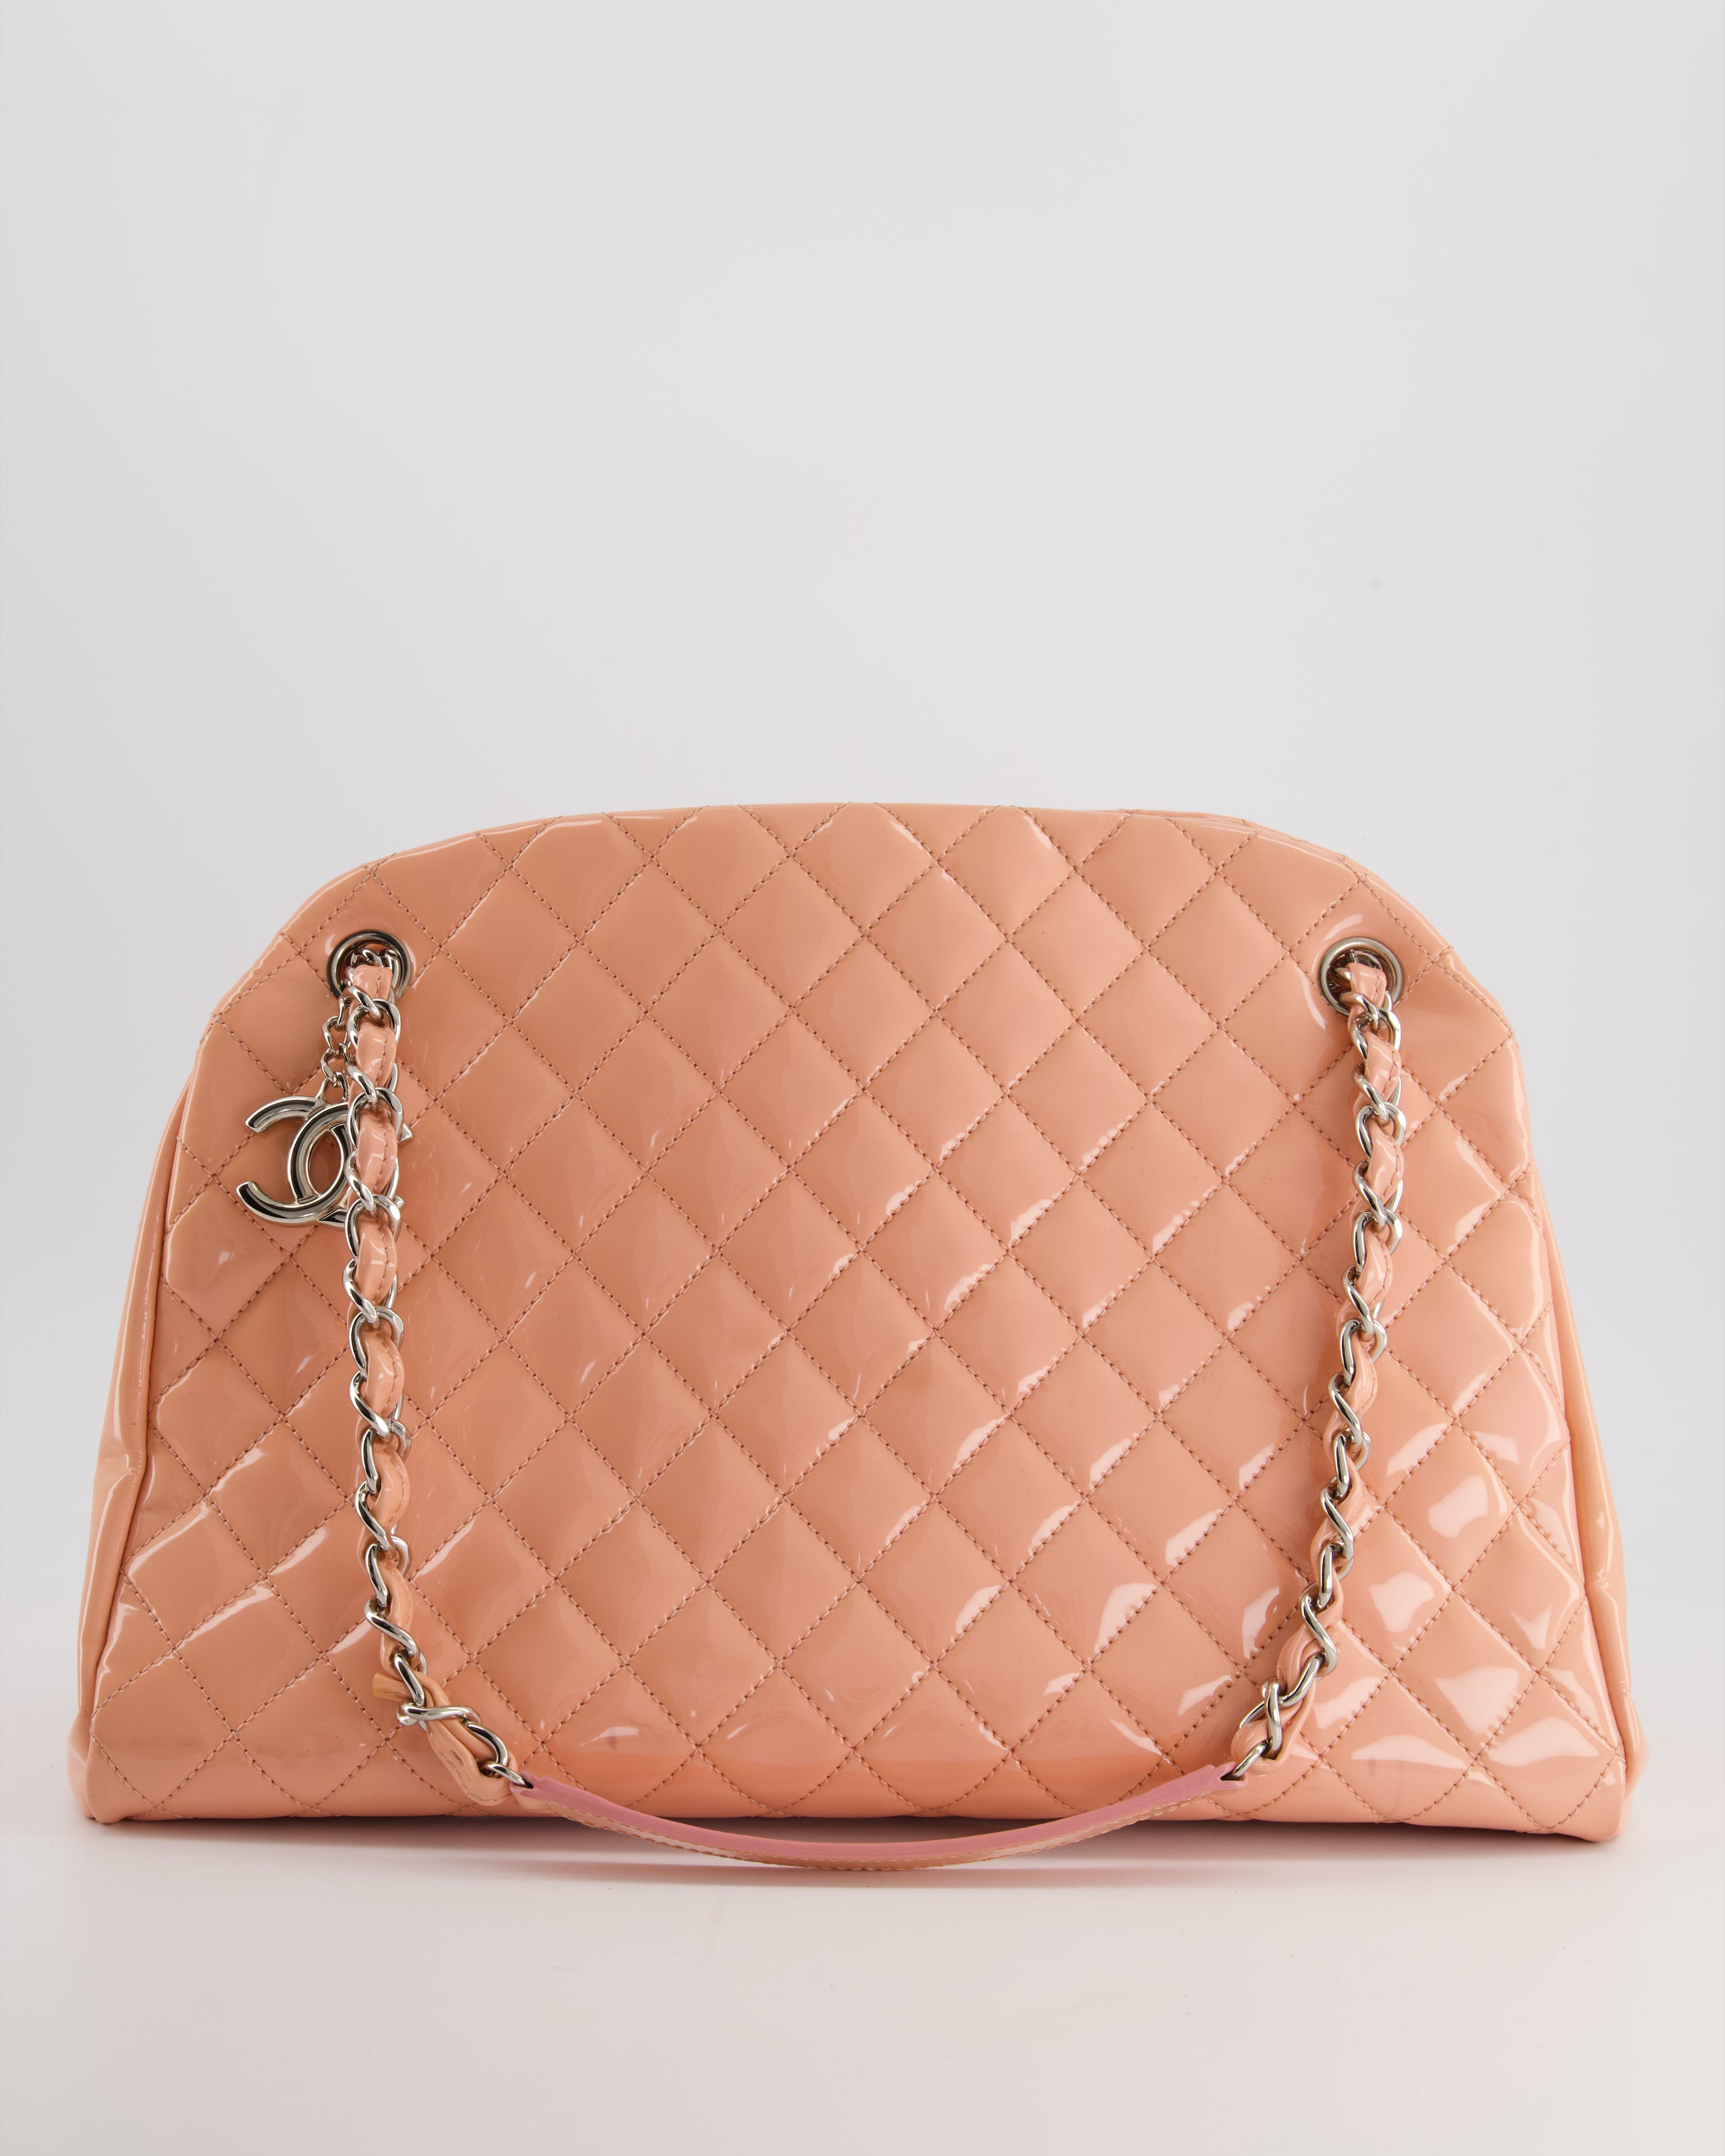 Chanel Pink Patent Mademoiselle Shoulder Bag with Silver Hardware – Sellier